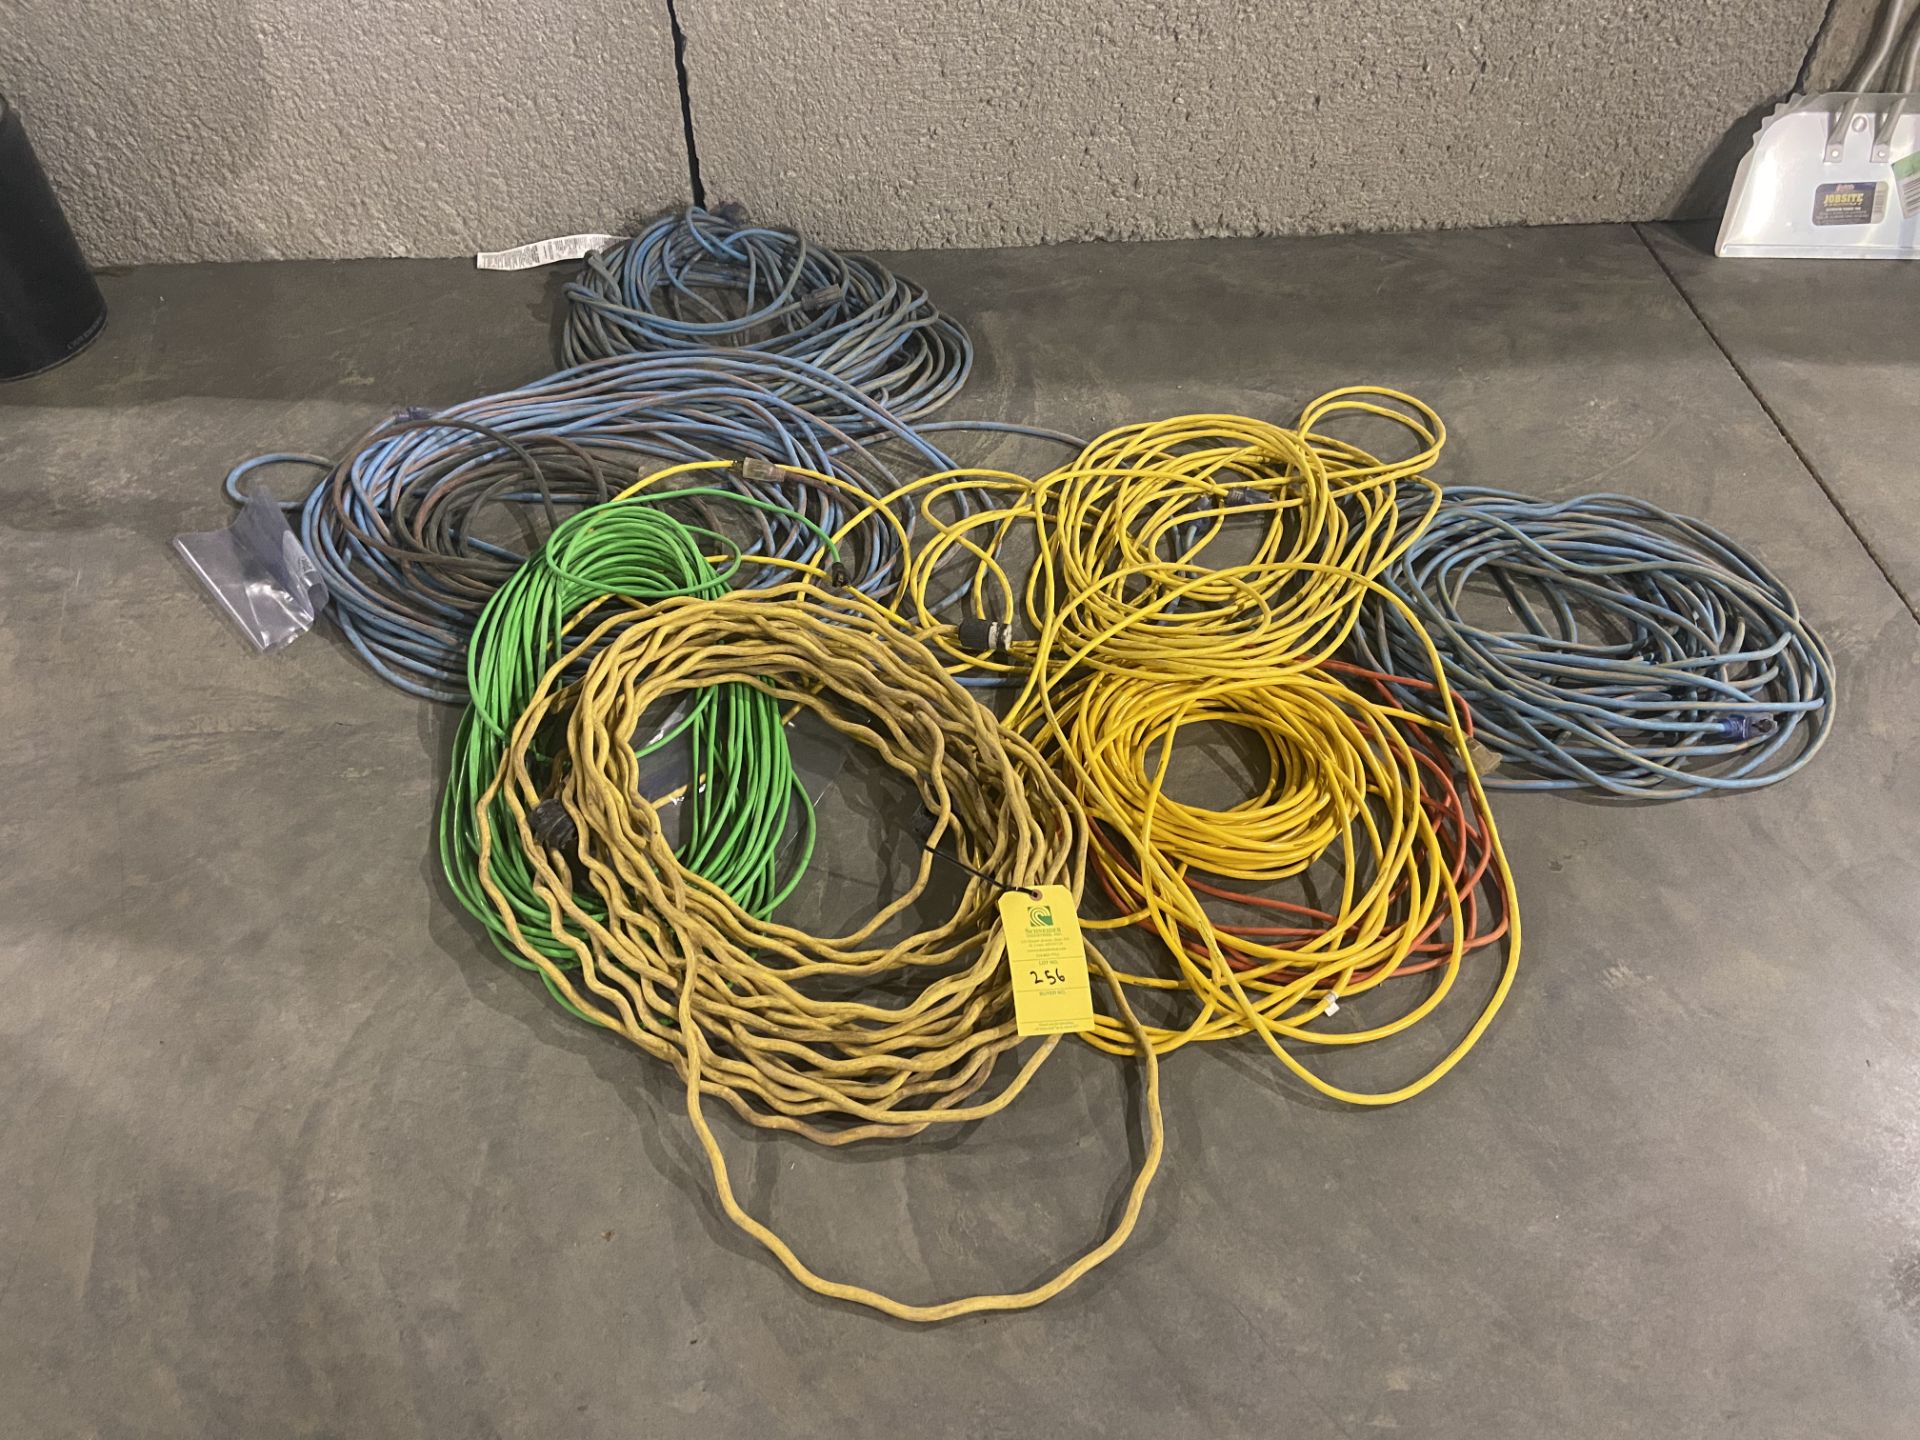 Extension Cords (All Pictured) Rigging Fee: $10 - Image 2 of 3